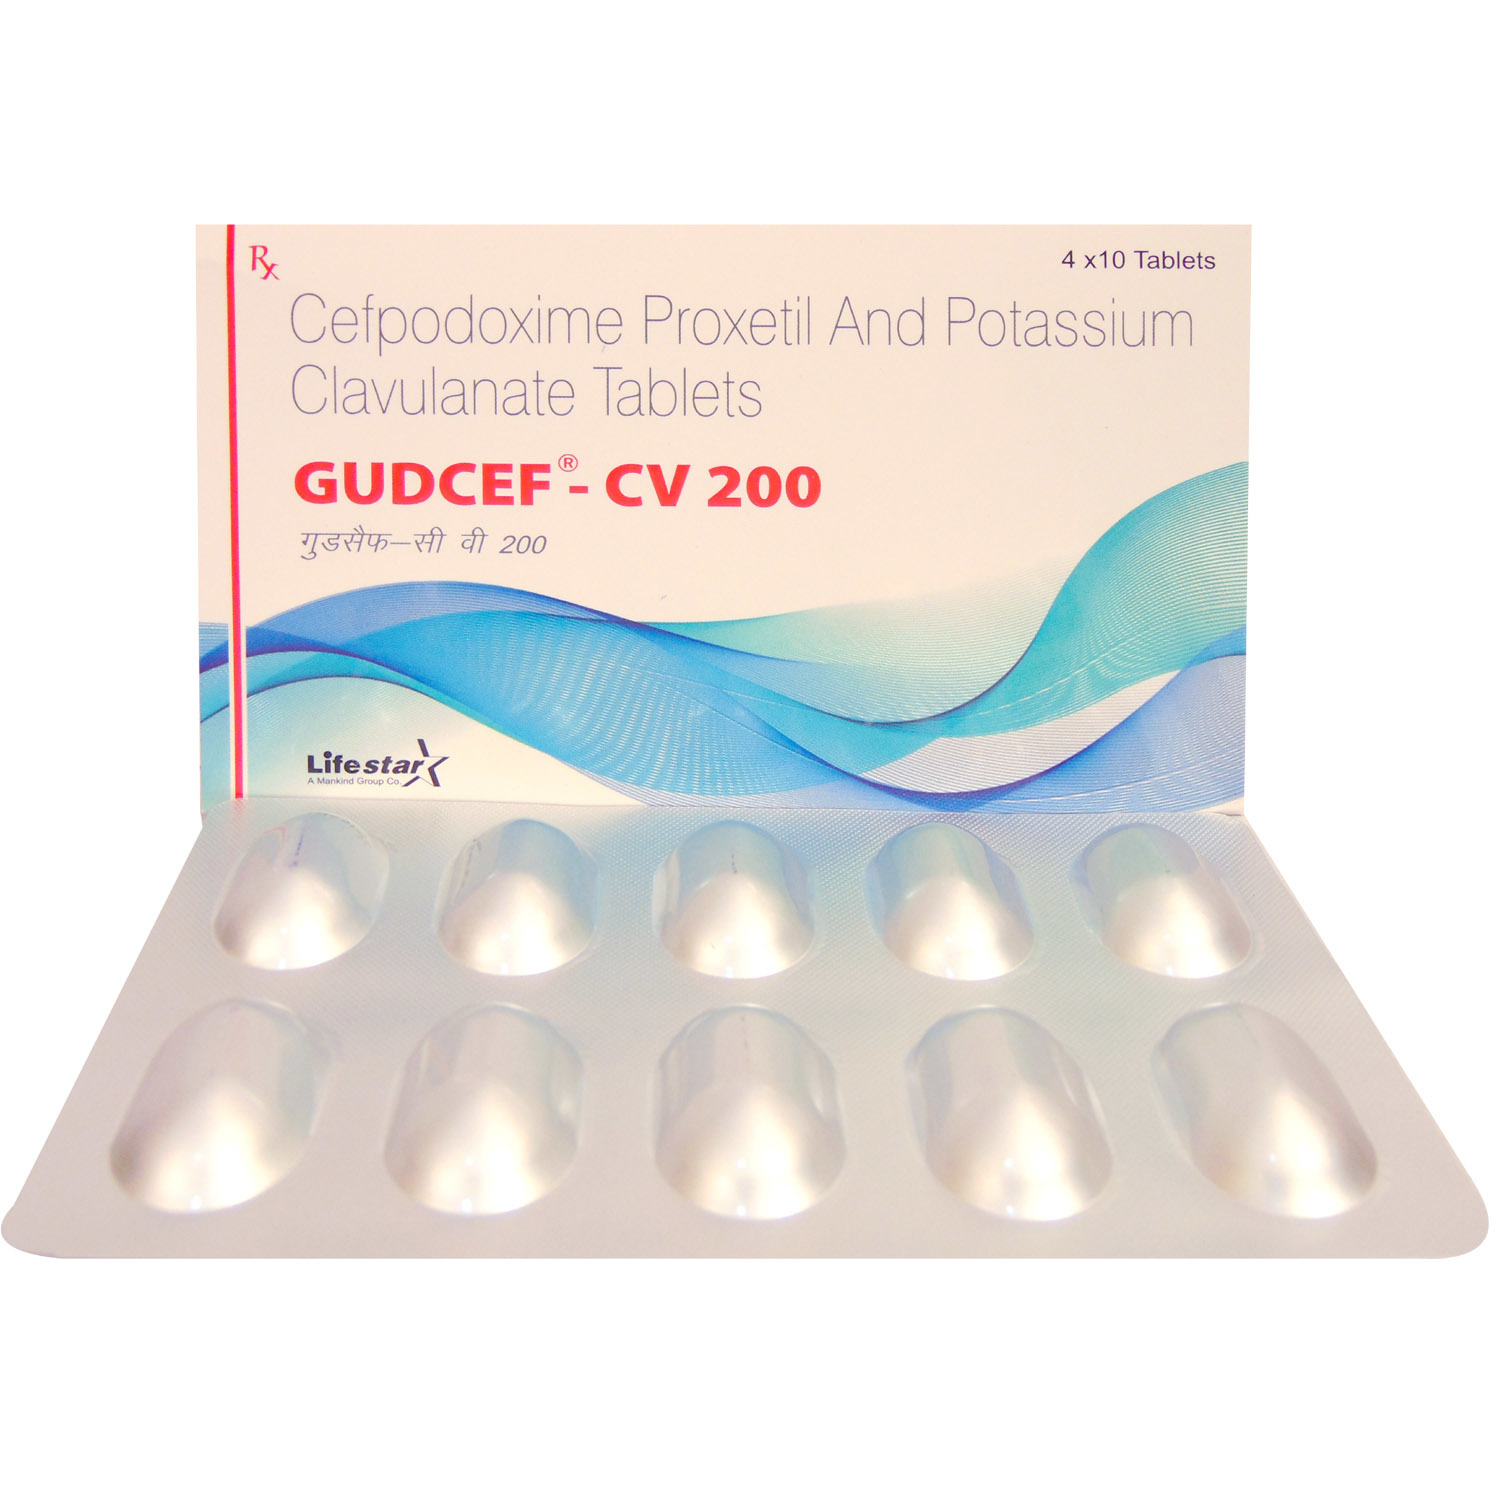 Cefixime And Clavulanate Tablet